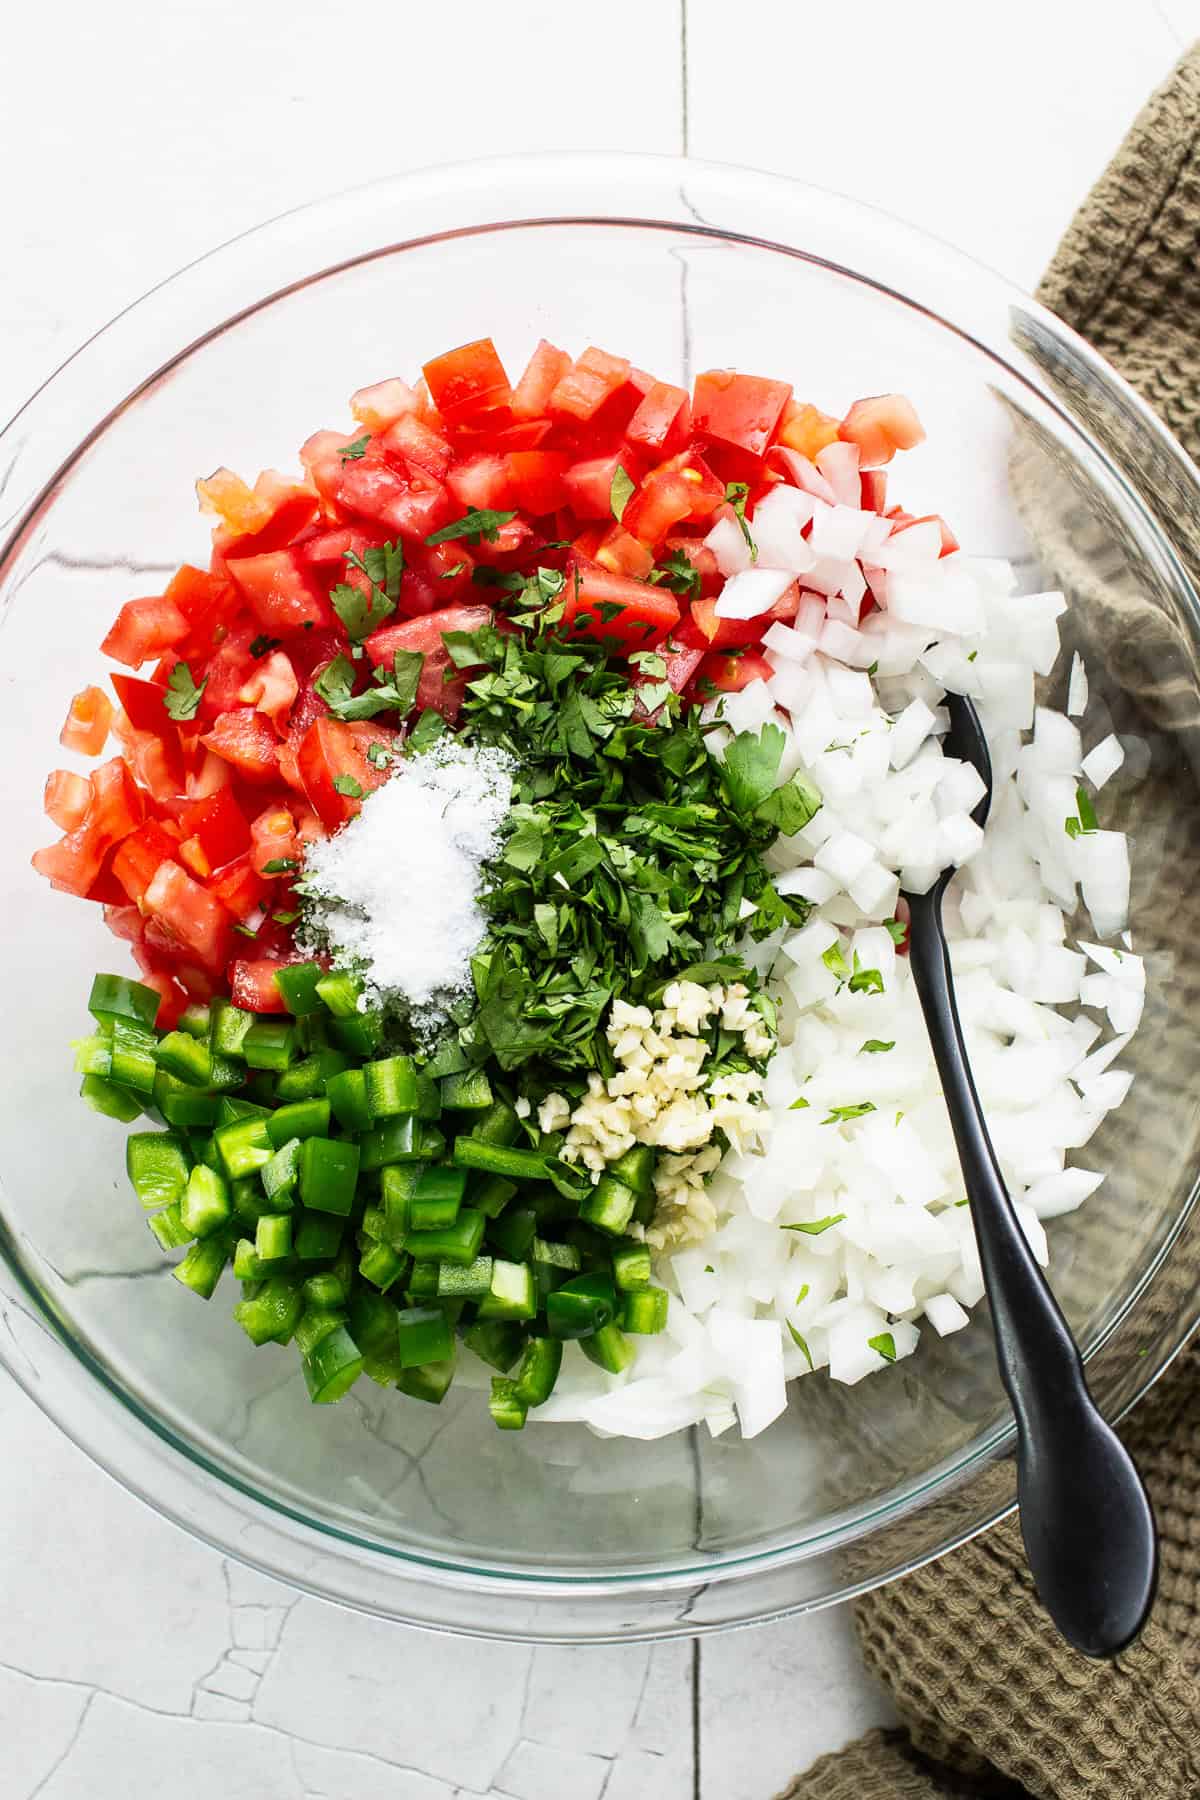 Tomatoes, onions, jalapeños, garlic, and salt added to a bowl to make a pico de gallo recipe